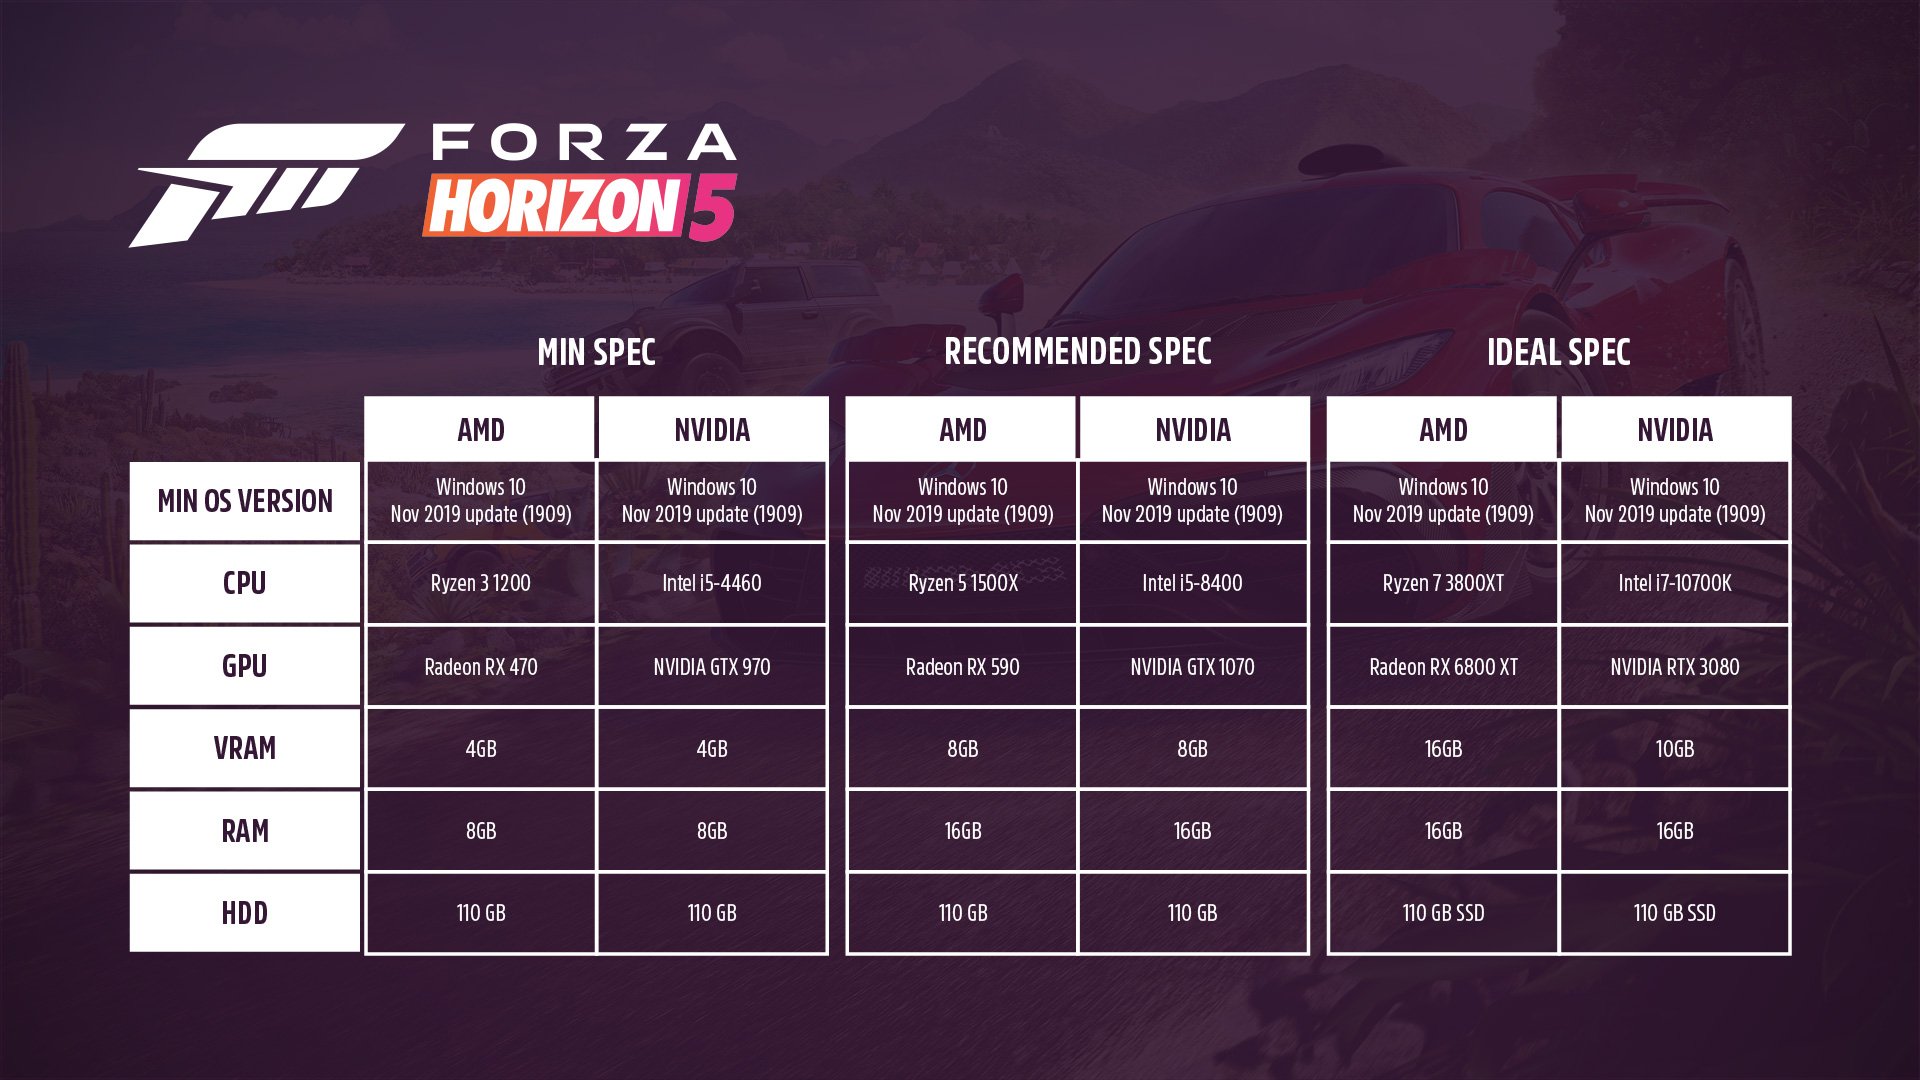 Final system requirements for Forza Horizon 5 now available